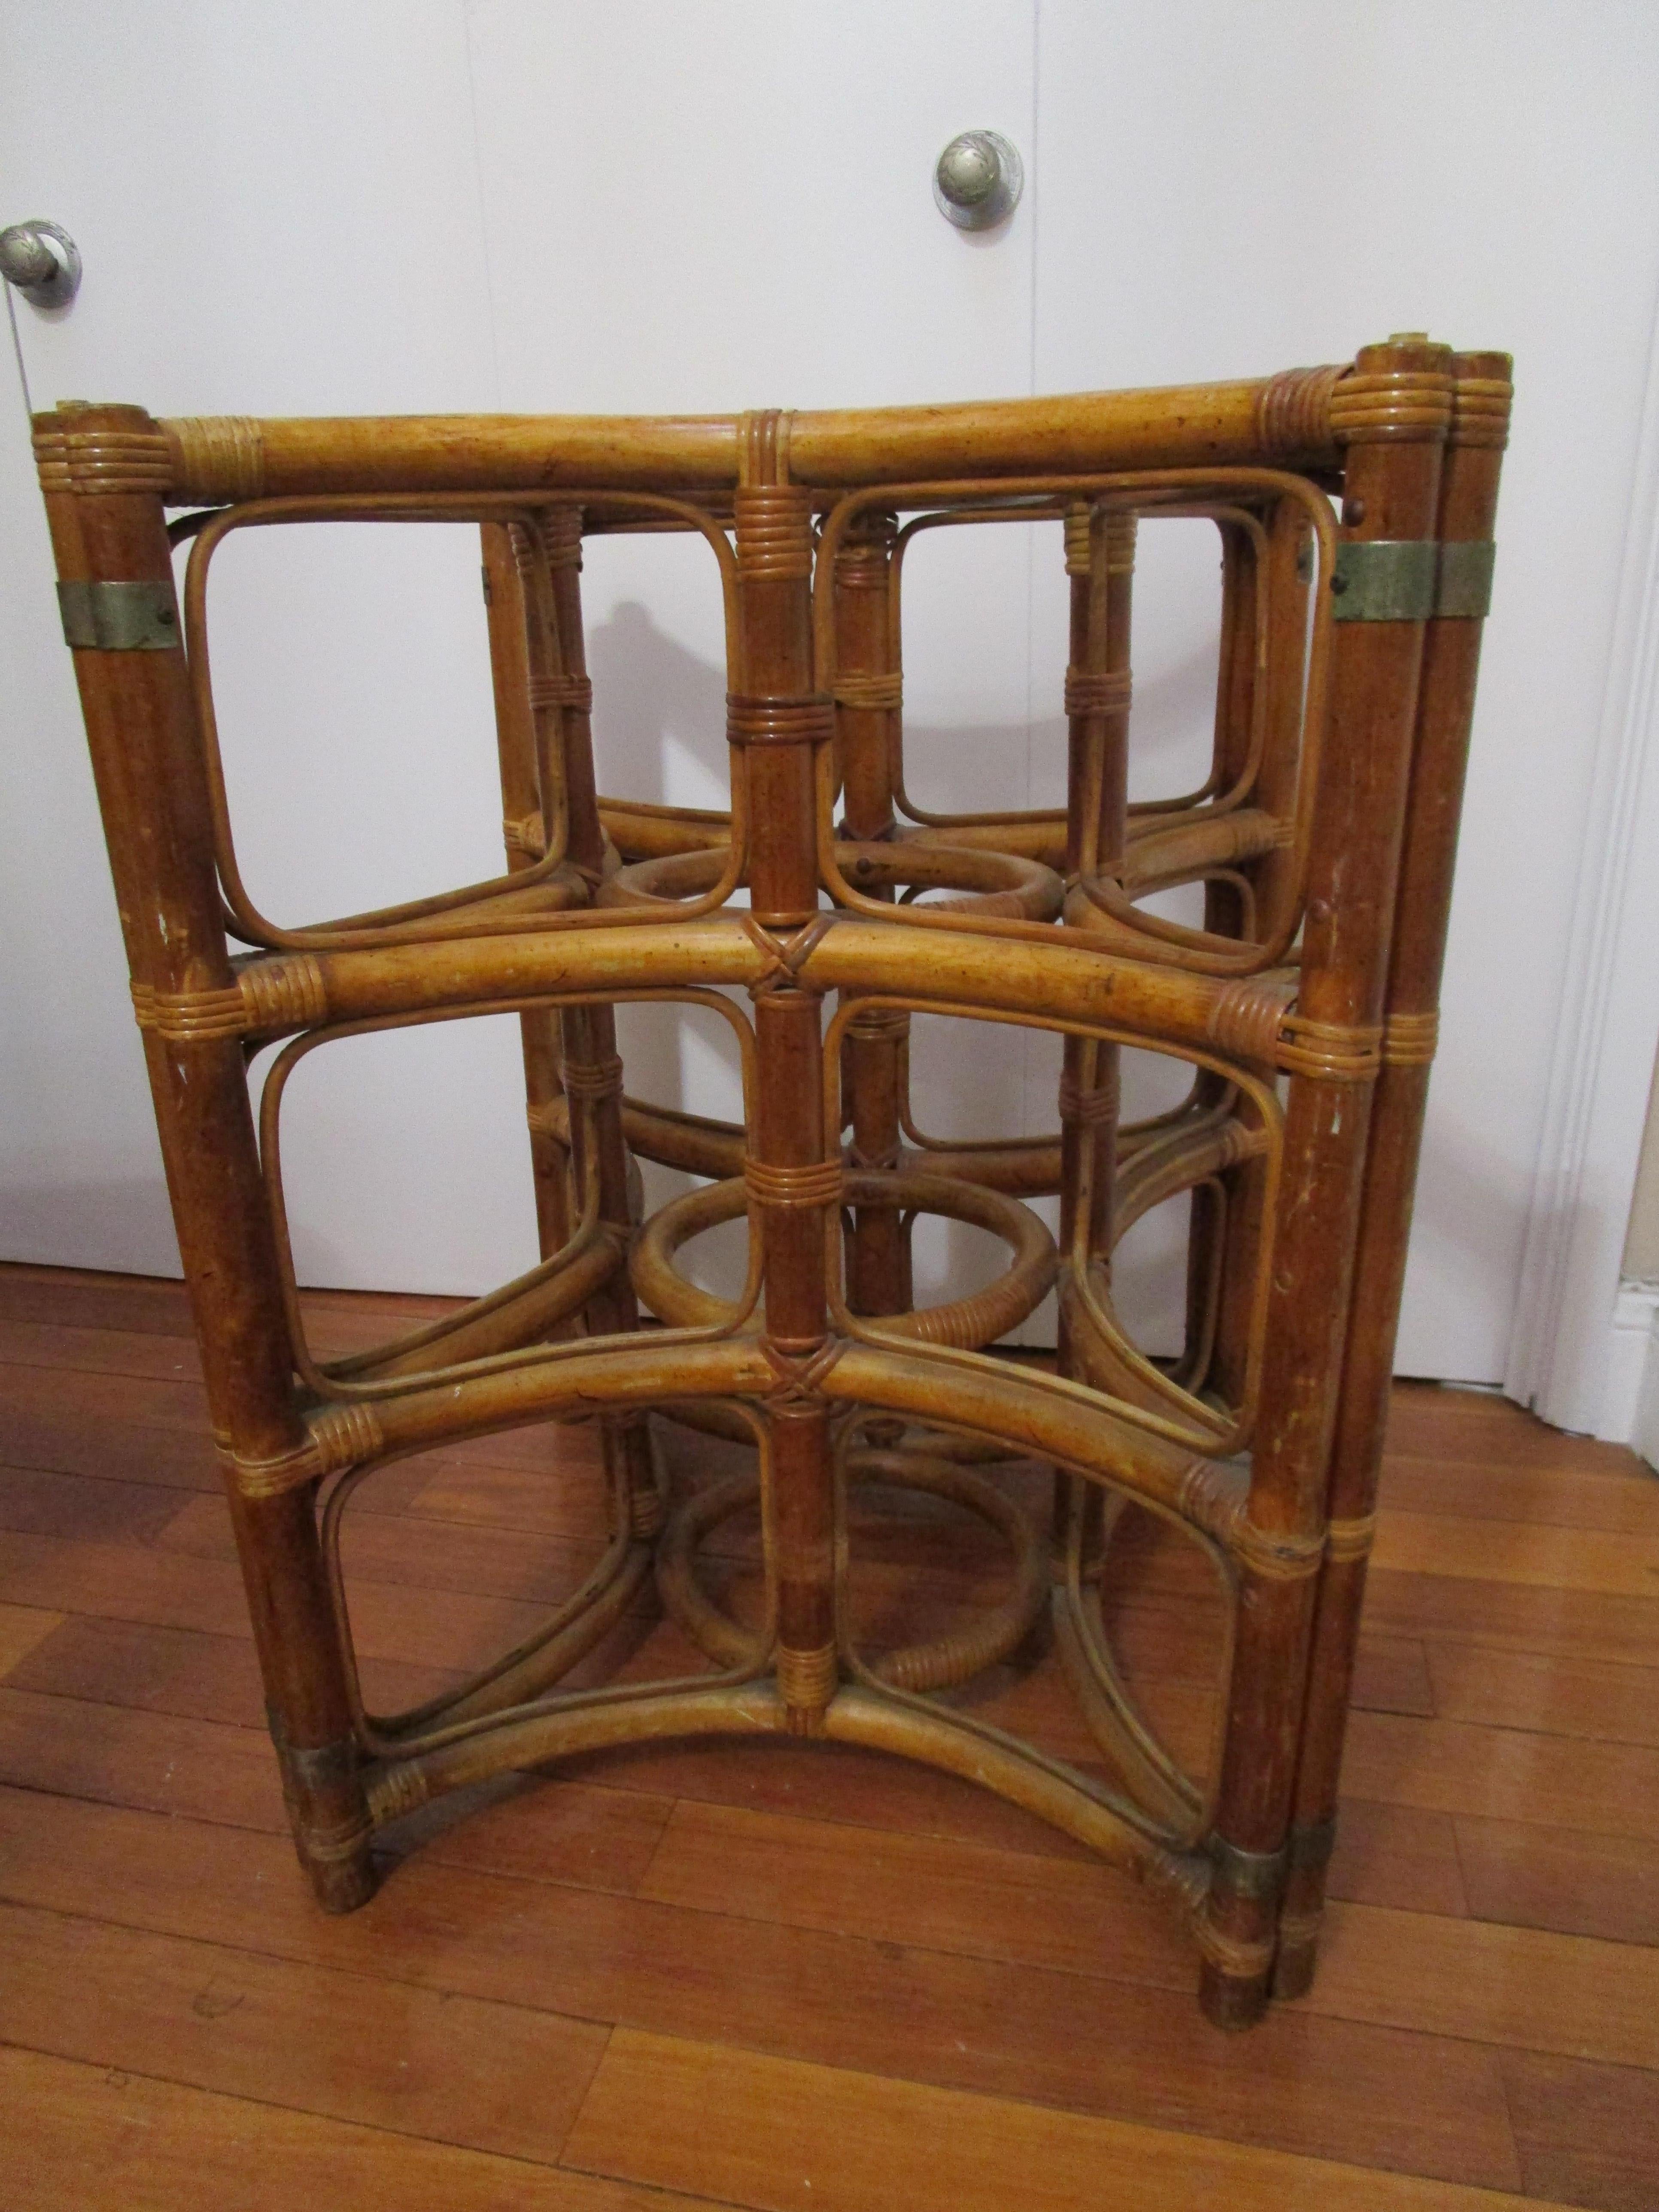 This chic vintage table base is constructed of bamboo and rattan. It has an attractive patina and 